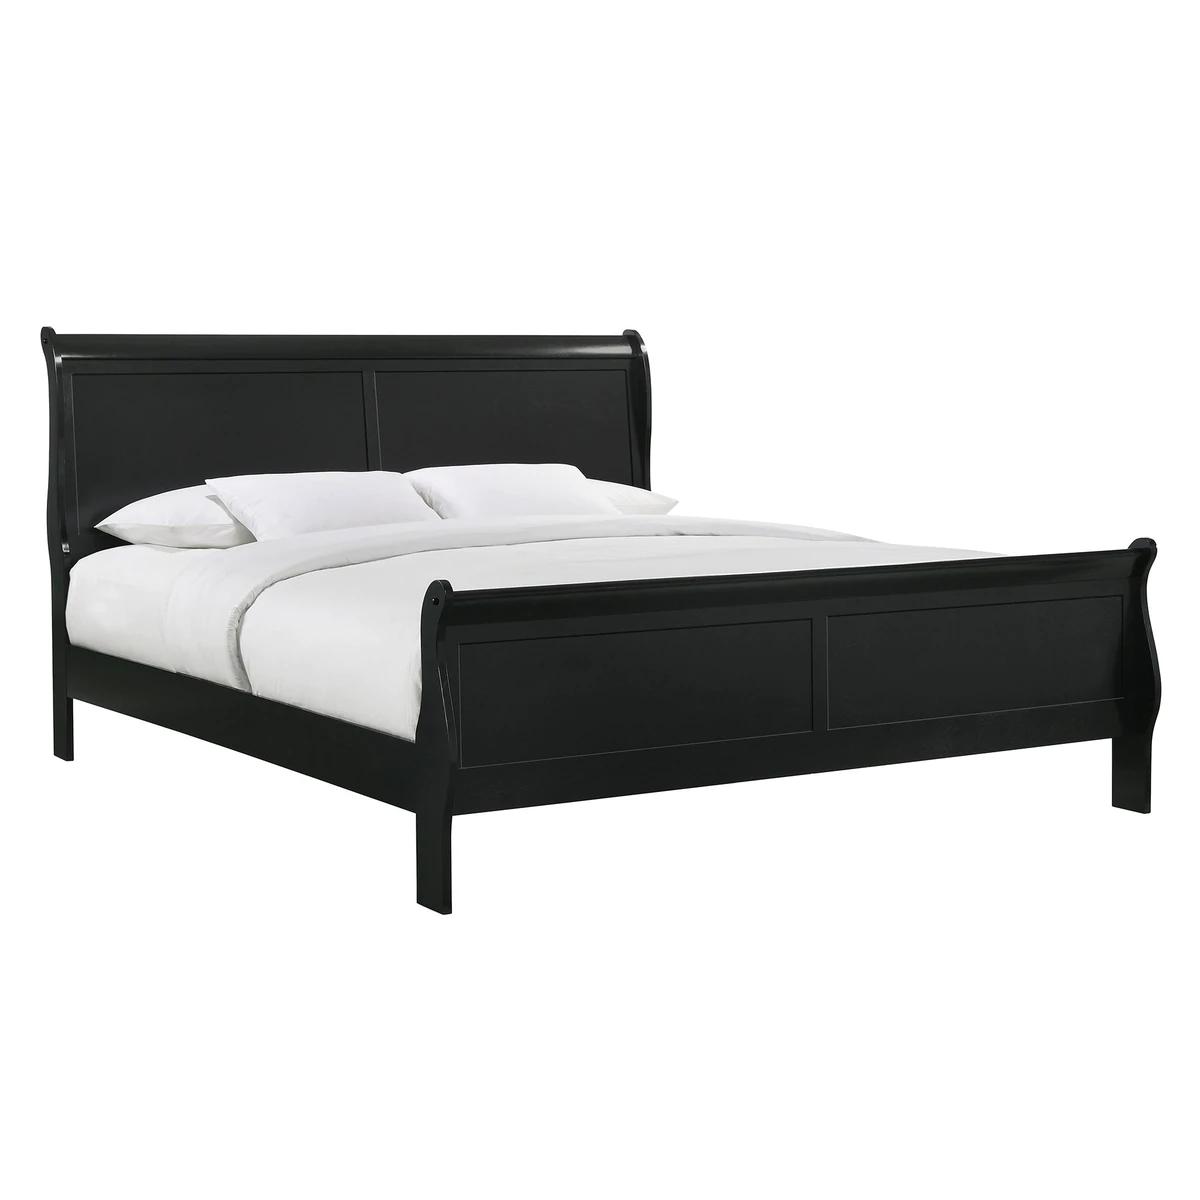 Contemporary, Simple Panel Bed Louis Philip B3950-K-Bed in Black 